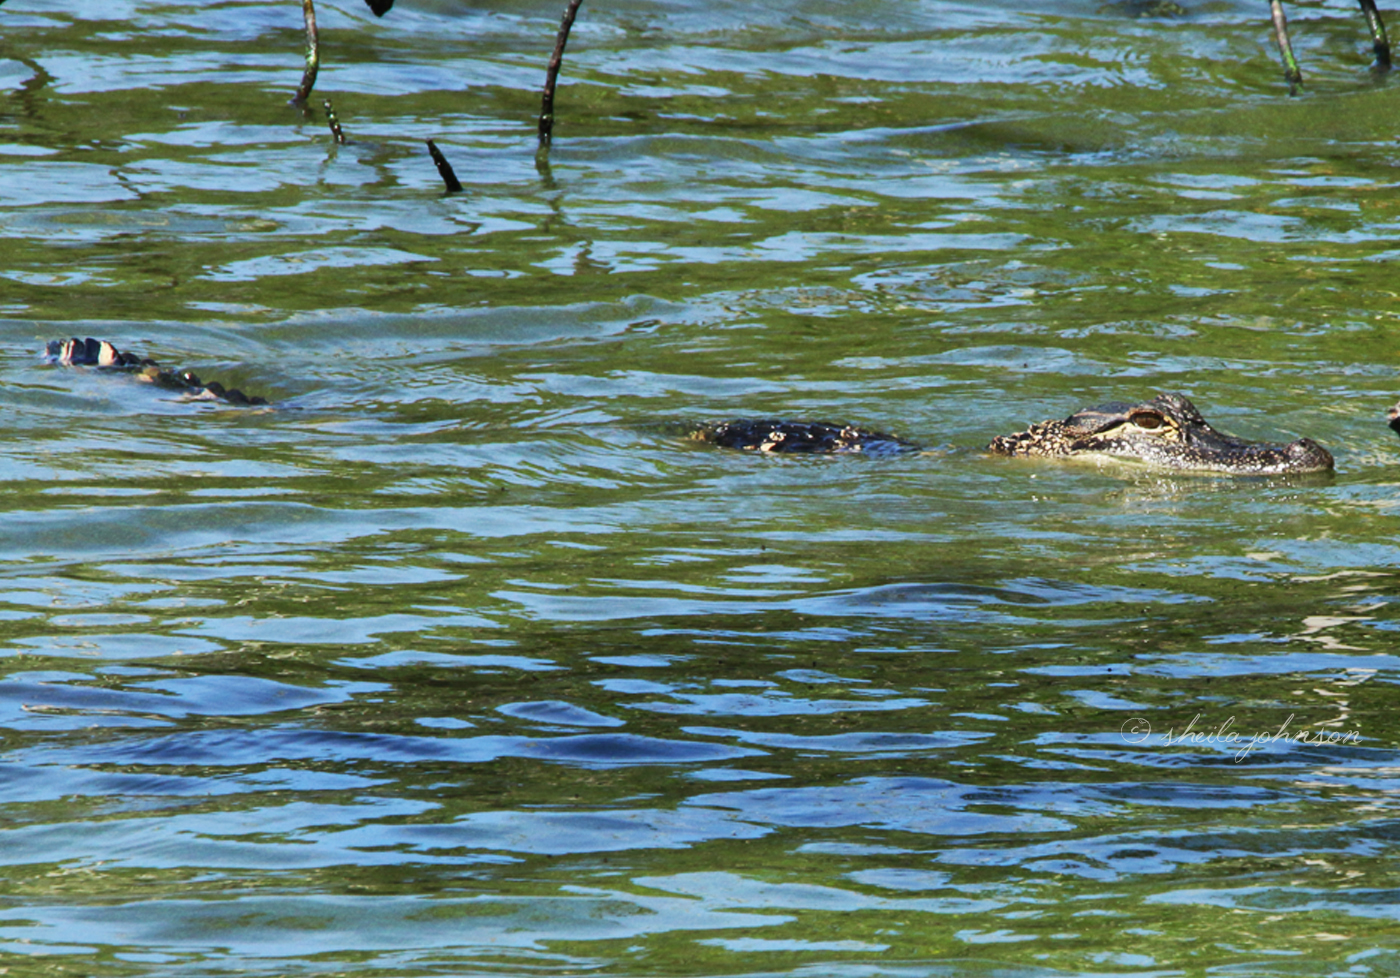 Alligators Can Be Seen (Or Maybe Not So Much) Among The Mangrove Tree Roots Along Shorelines Of Fresh And Brackish Water Bodies Throughout Florida. Caution Is Your Friend!